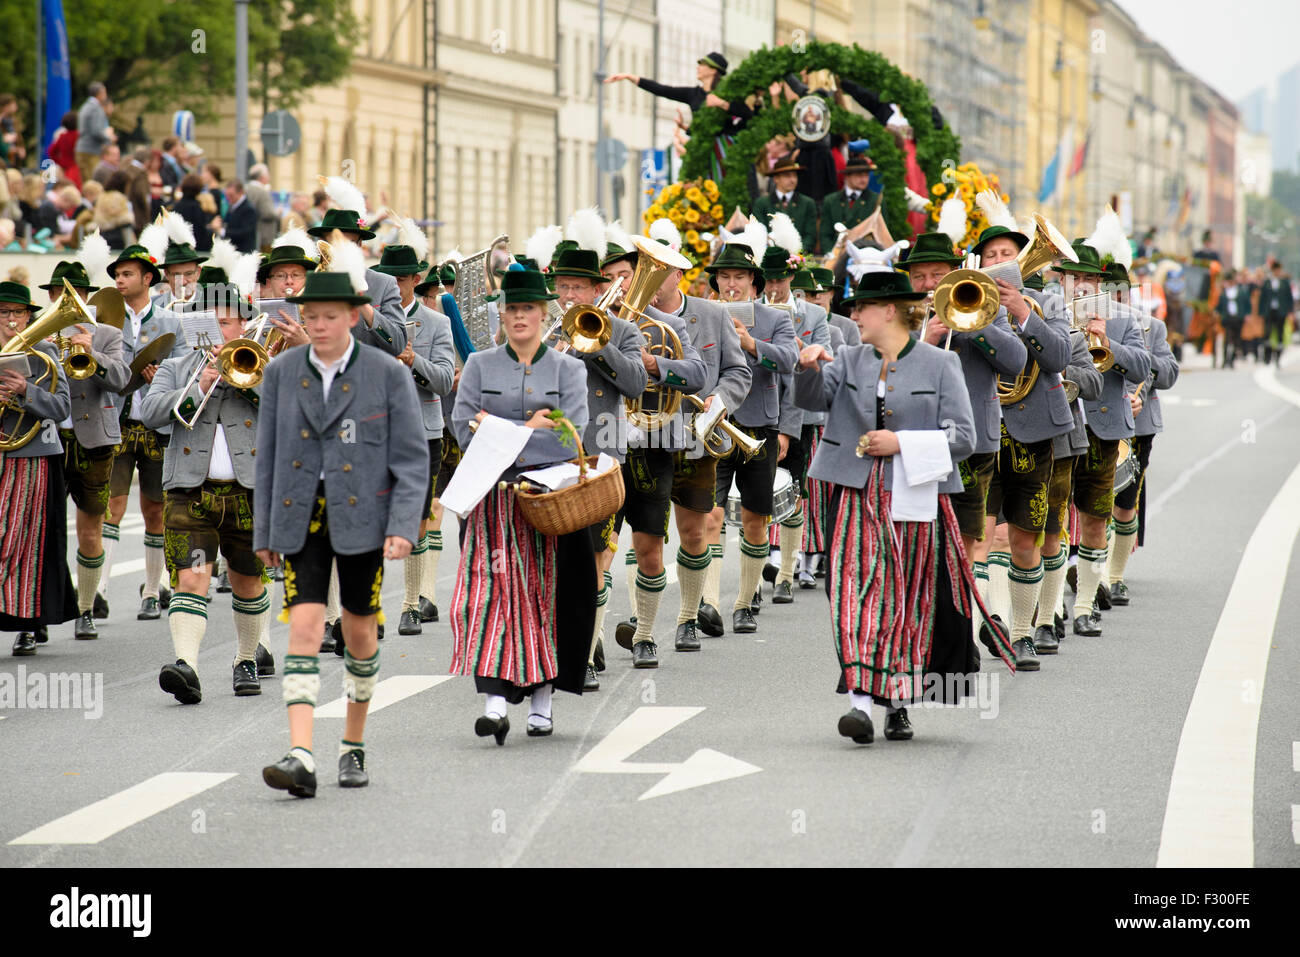 9000 people take place at the opening parade of the Oktoberfest in Munich, the world biggest and most popular beer festival Stock Photo